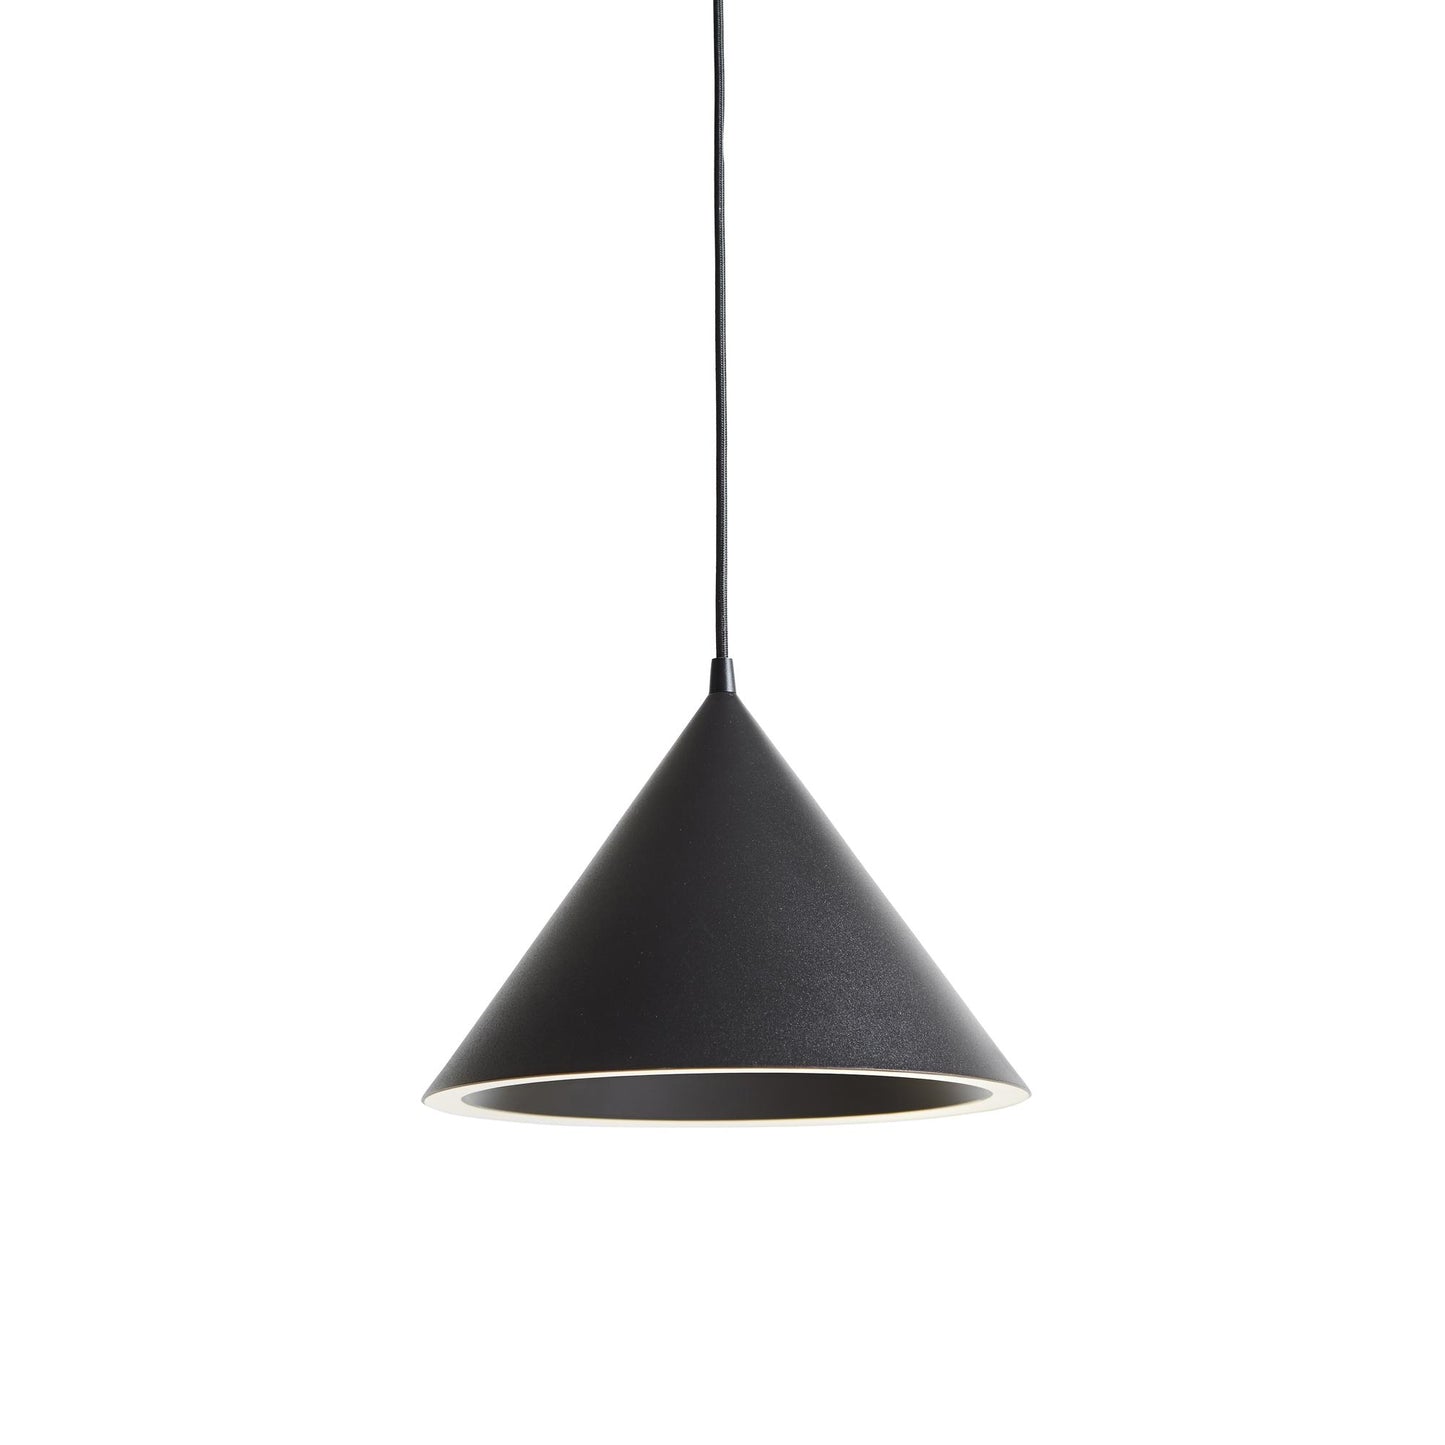 Annular Pendant Lamp Small by WOUD #Black